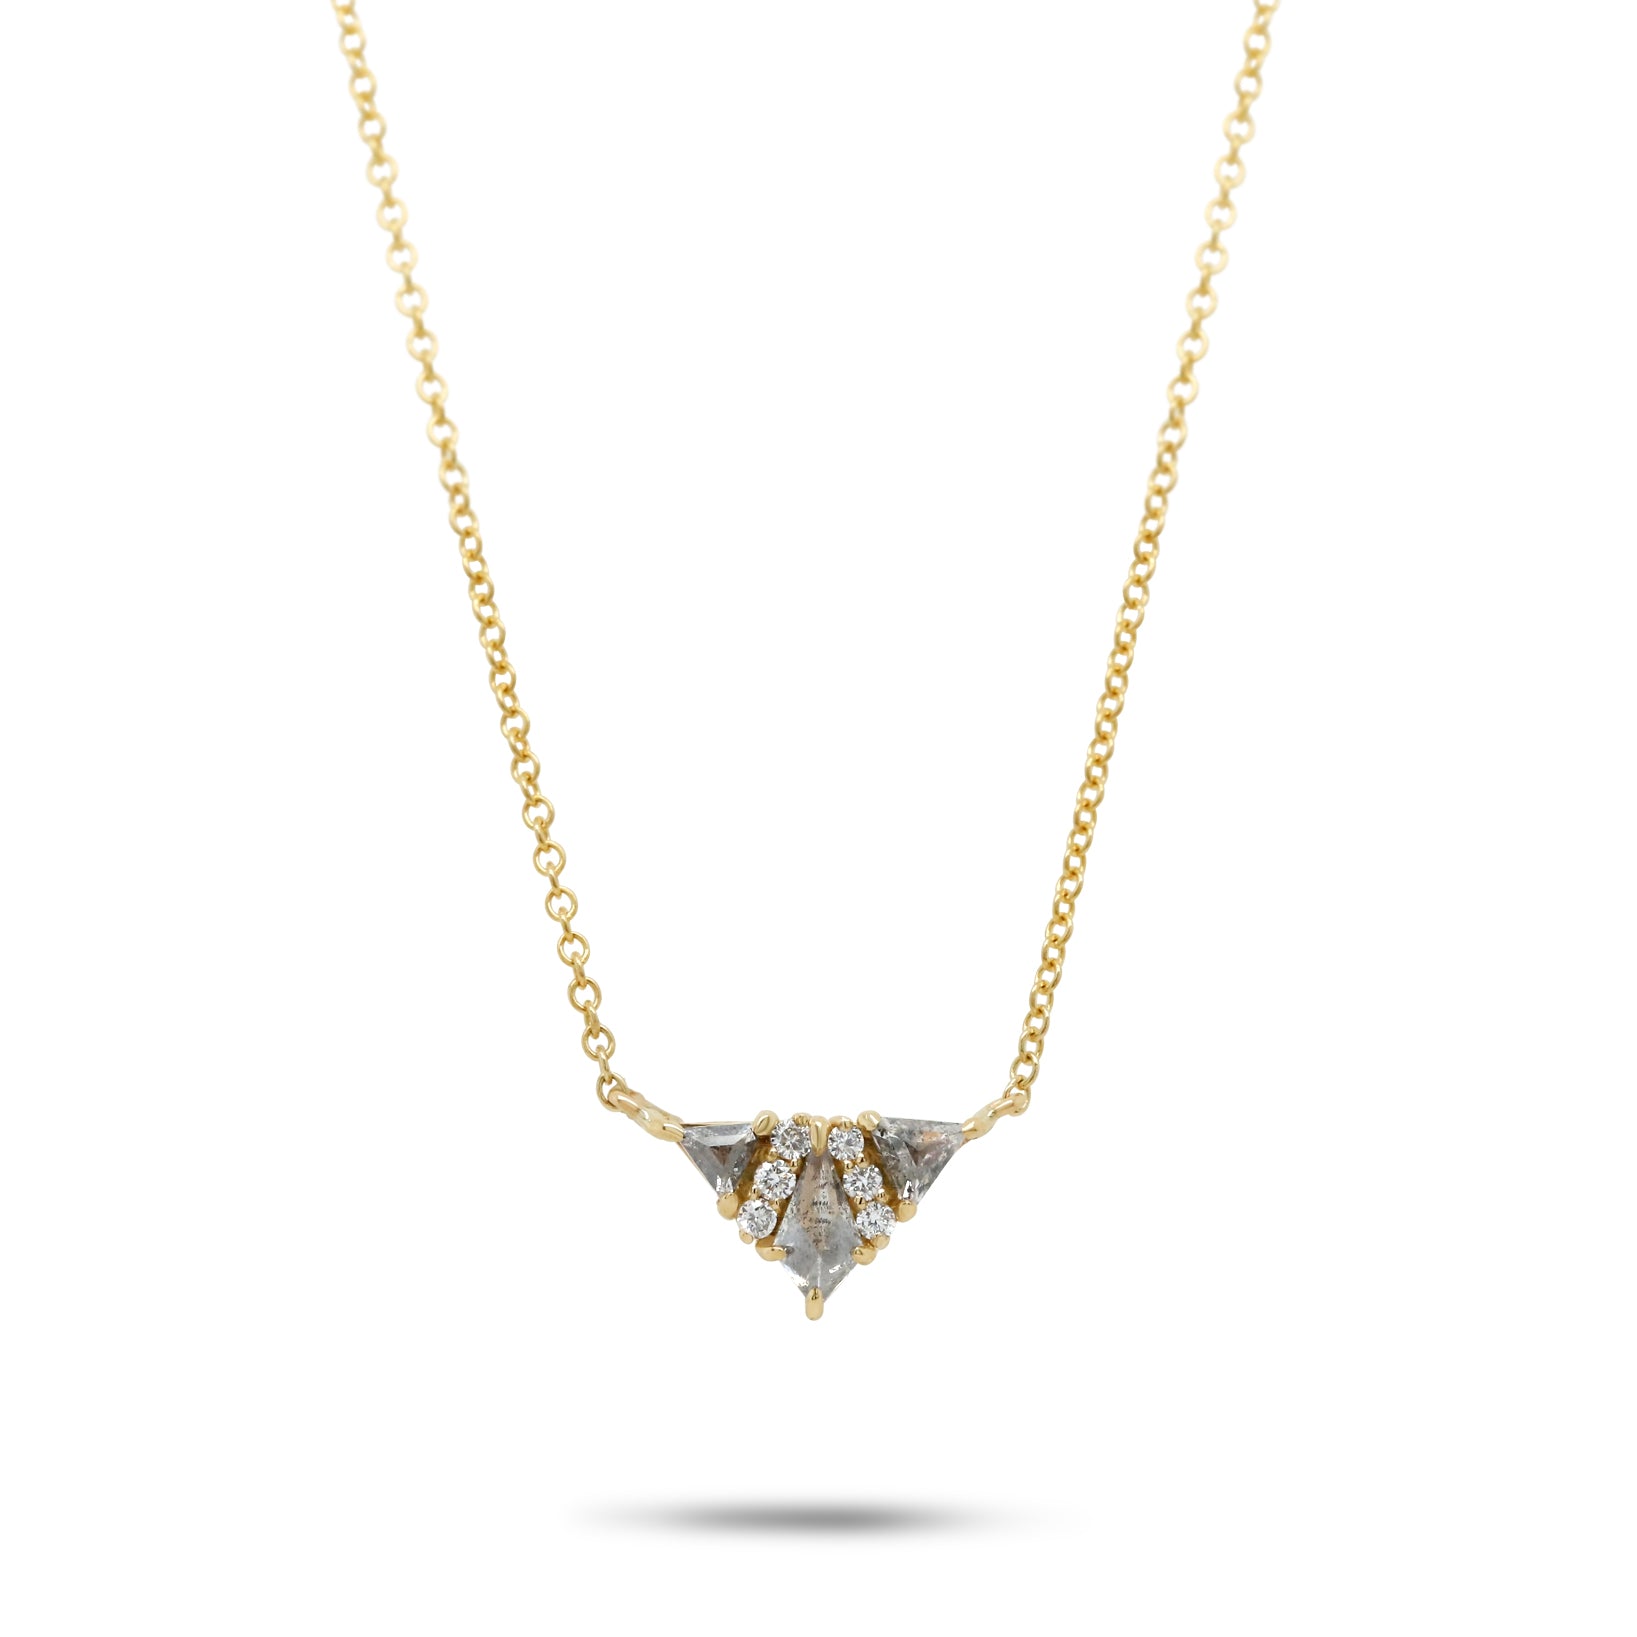 14k yellow gold triangle illusion cluster necklace kite and triangle shape gray diamonds with round brilliant cut accent diamonds